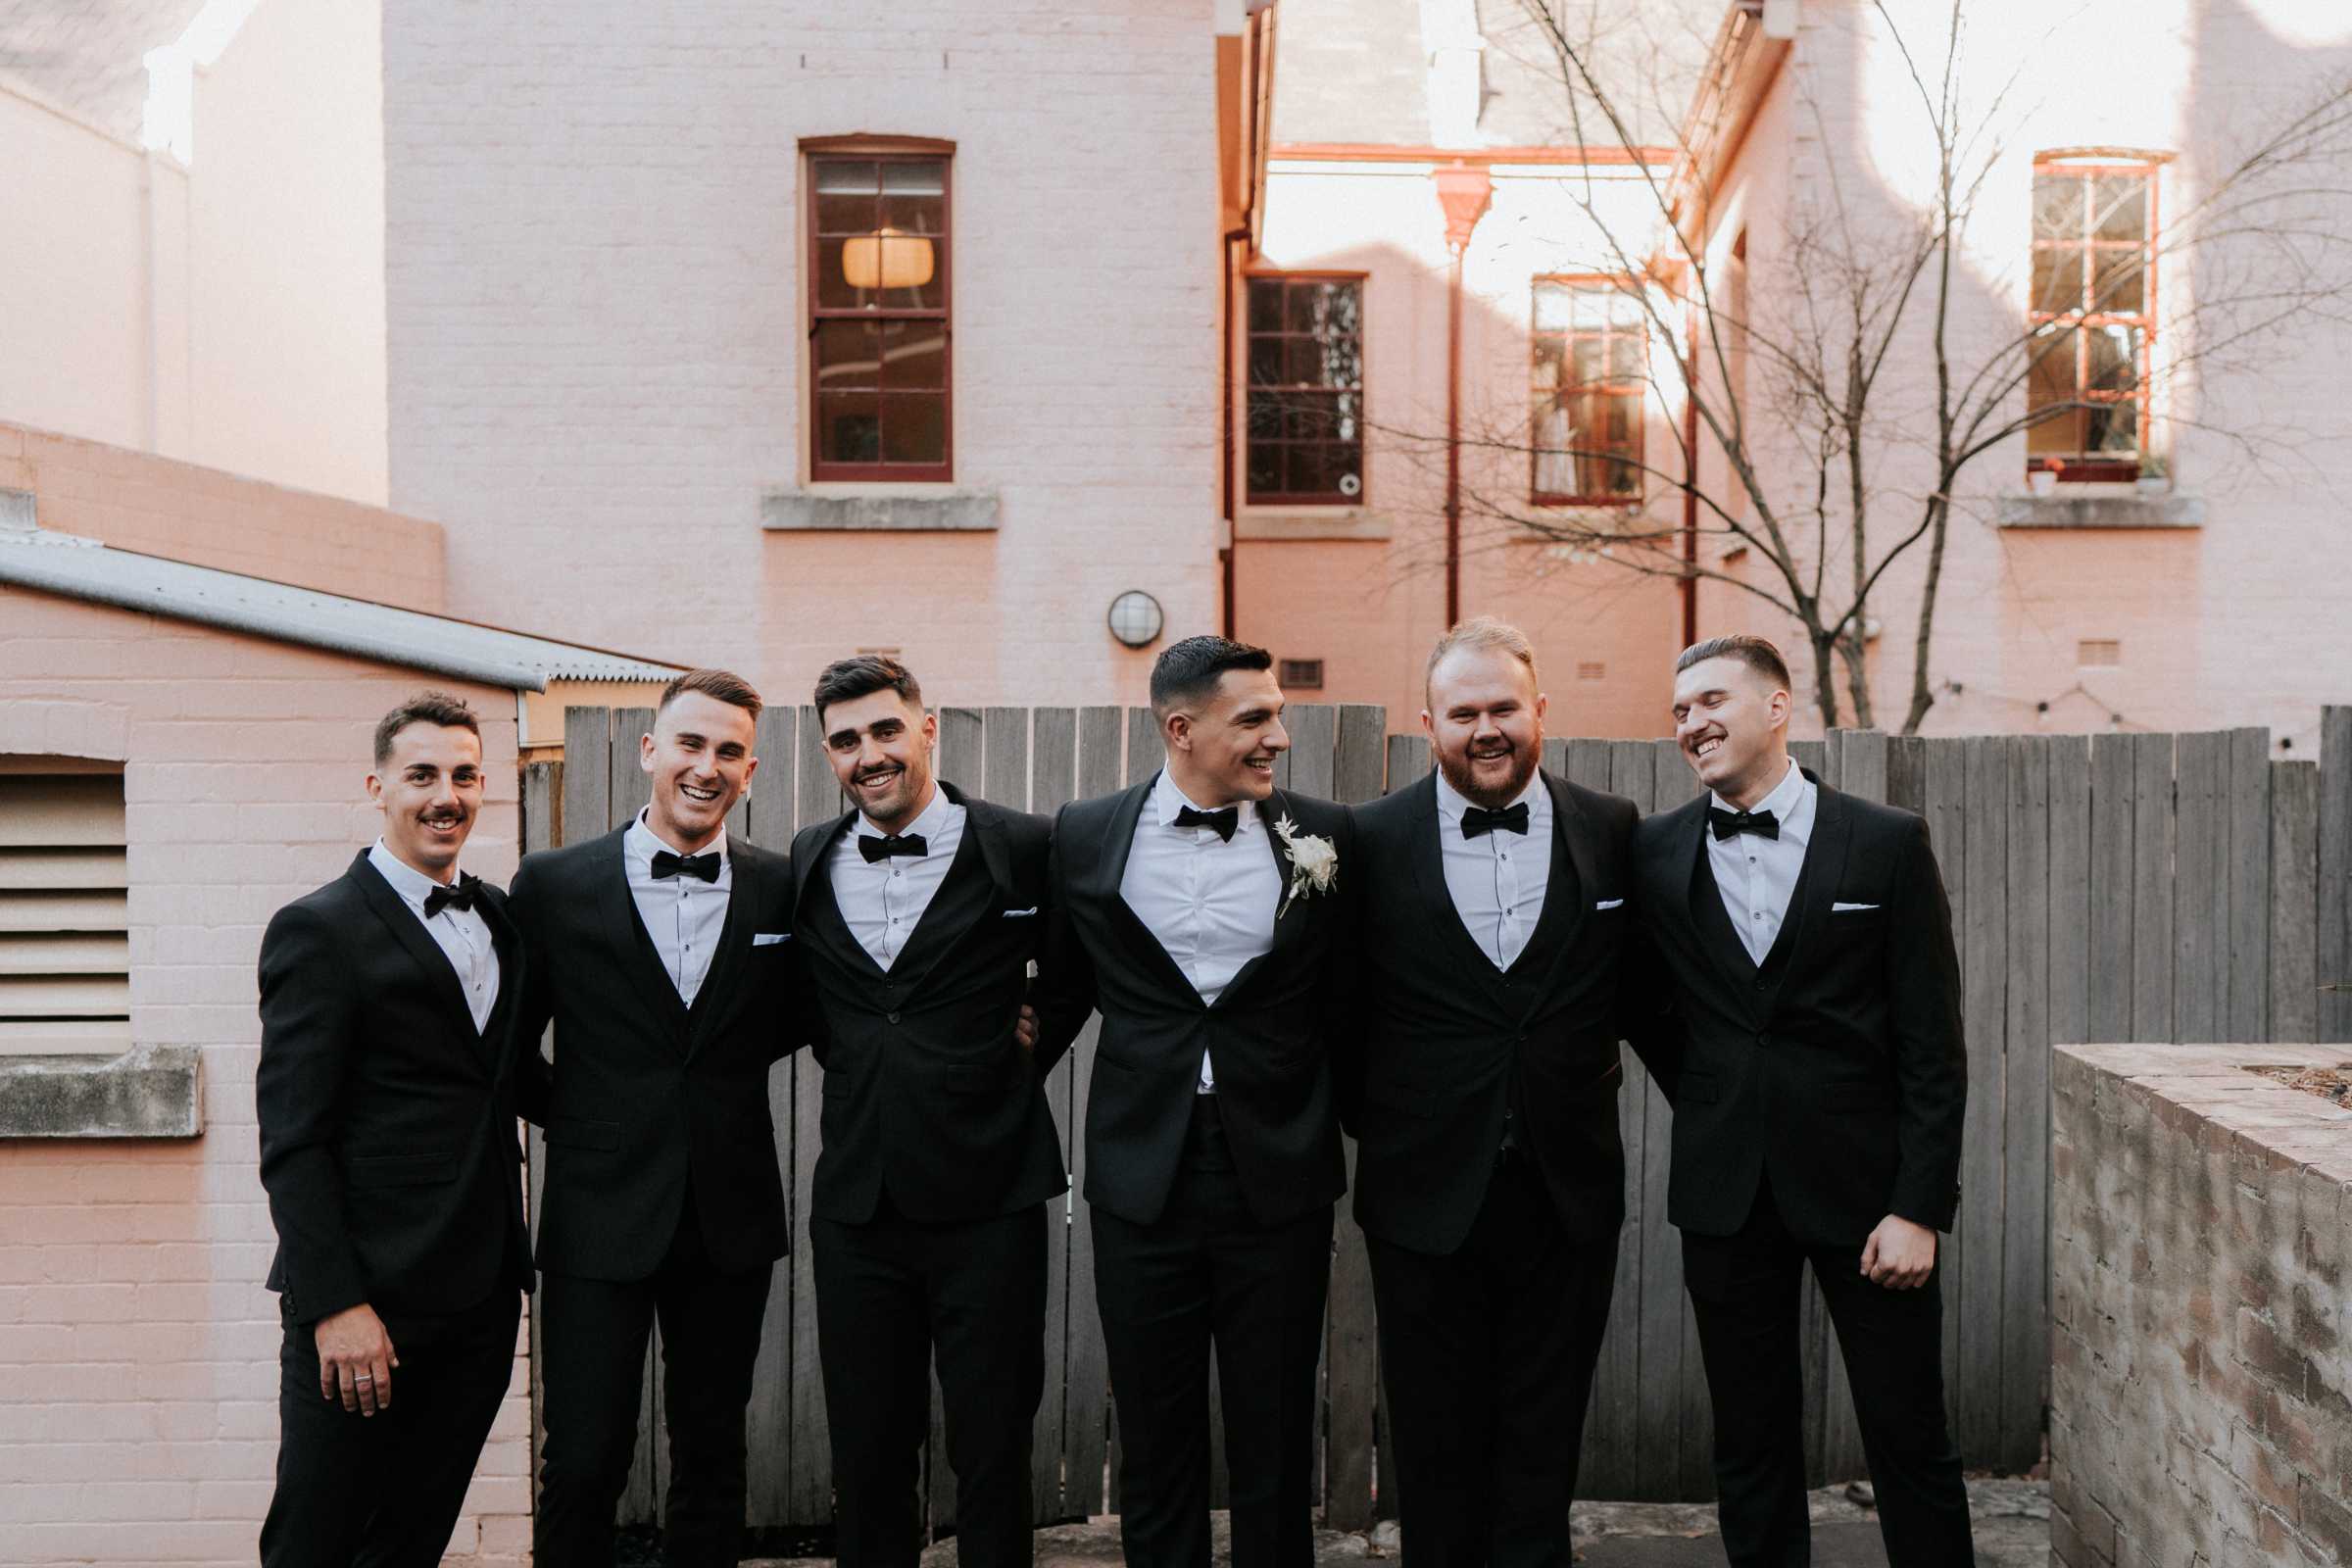 Doltone House Jones Bay Wharf Sydney wedding, Riannon and Mitch, groom and groomsmen in black tuxes, photo by The Evoke Company